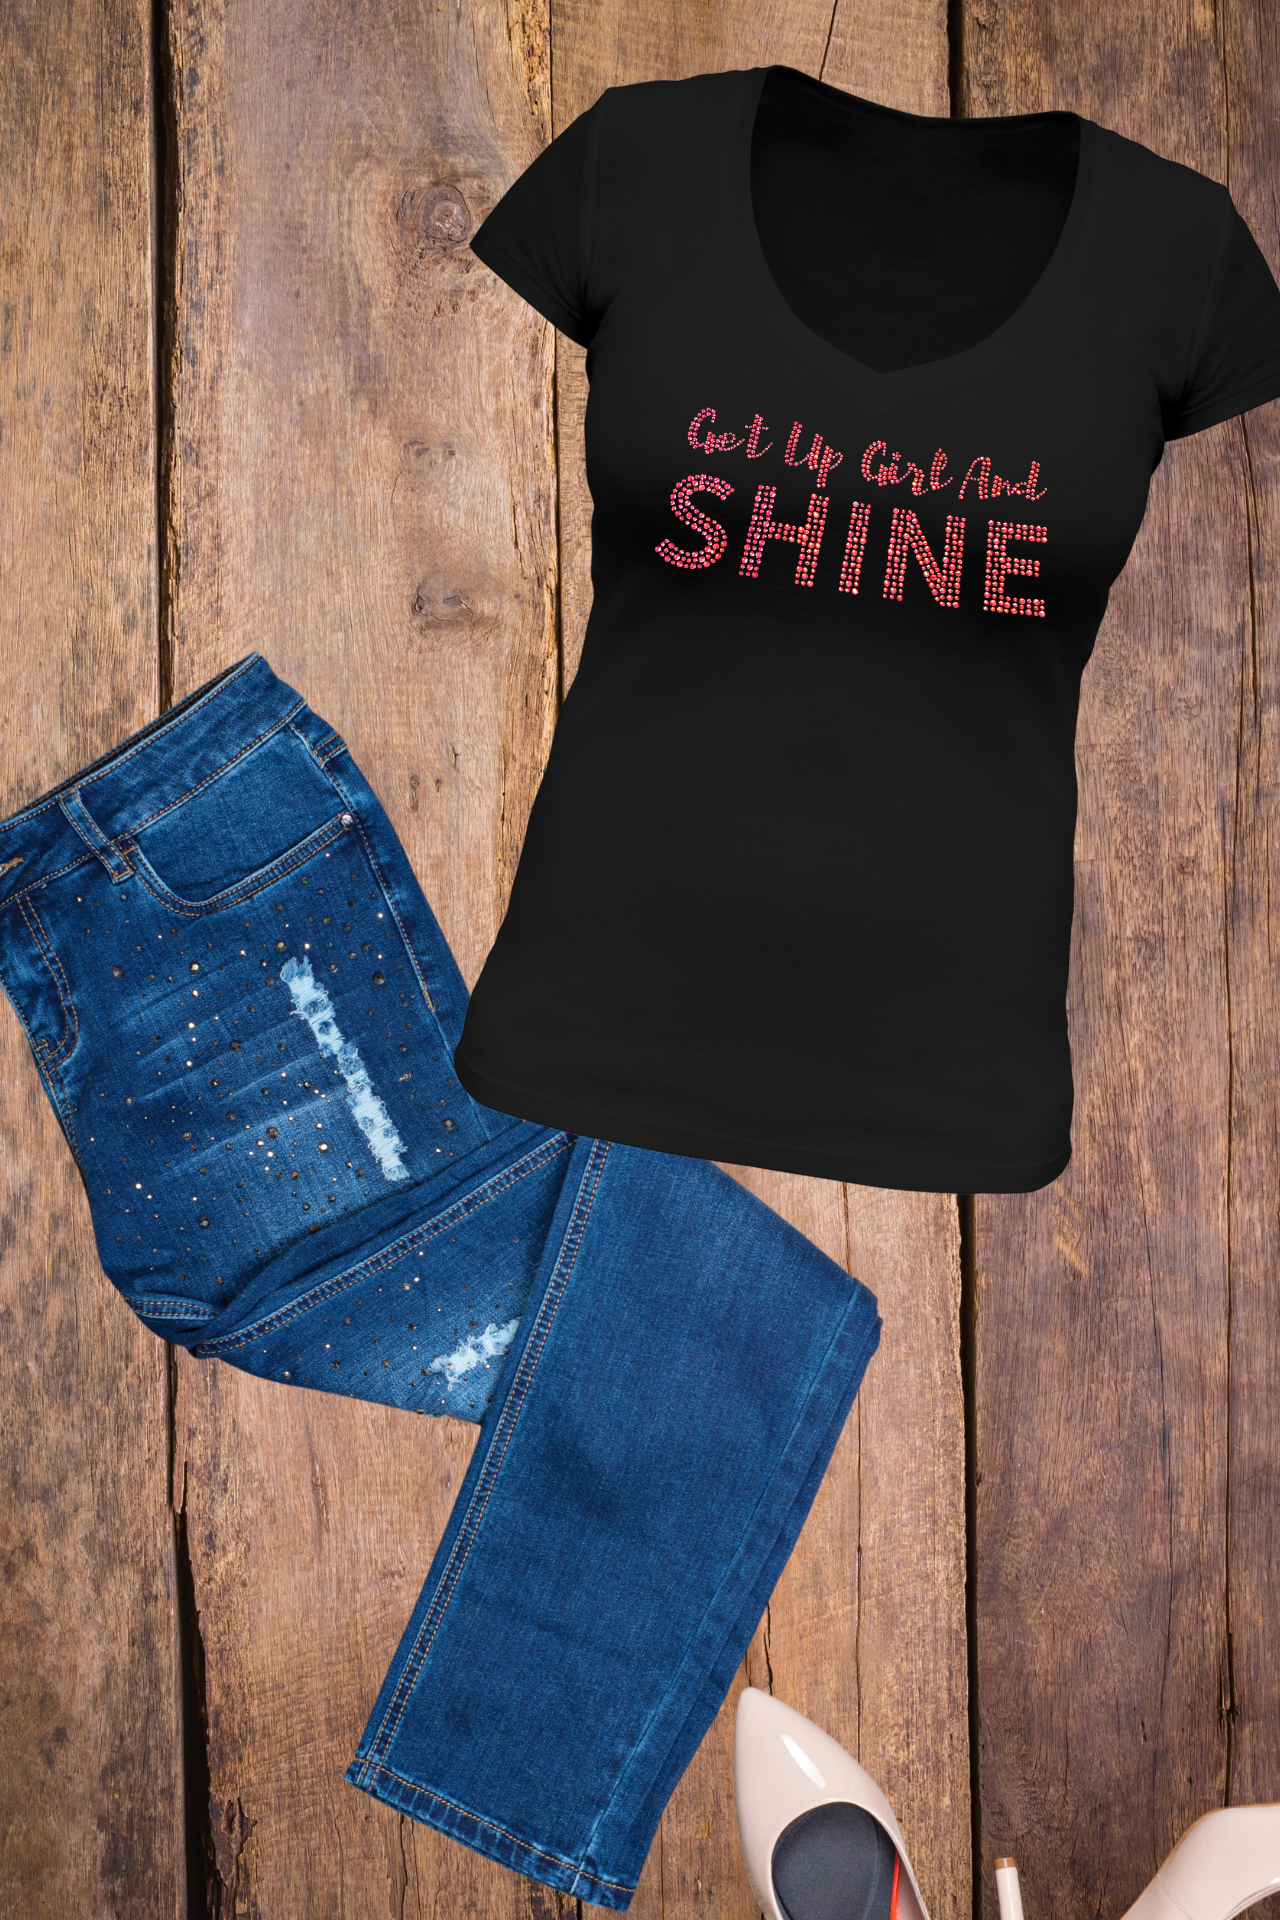 The "Get Up Girl and Shine" Affirmation Tee